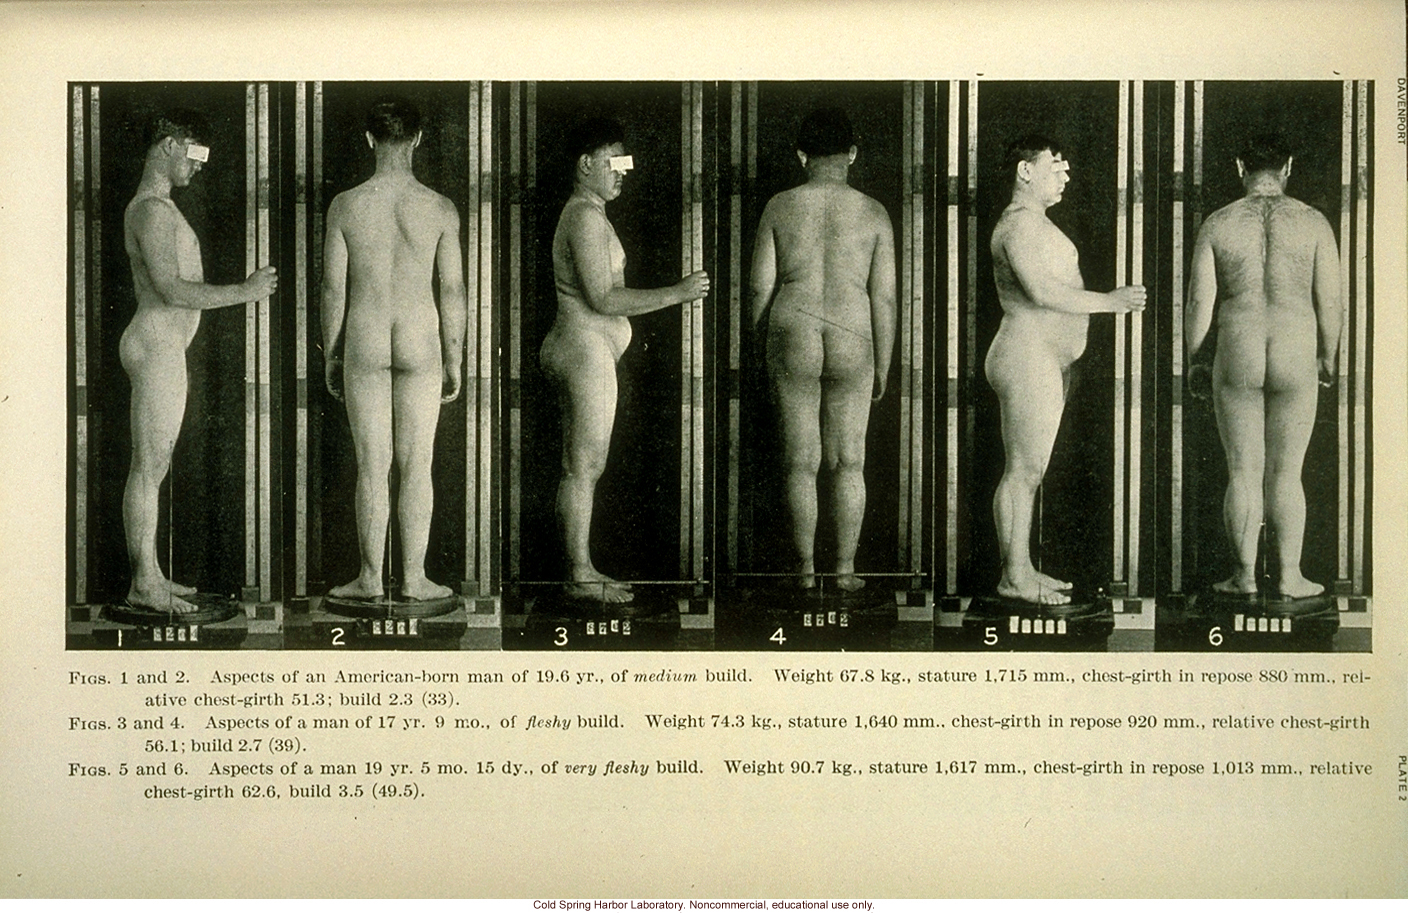 &quote;Body build: its development and inheritance,&quote; by C.B. Davenport, Eugenic Record Office